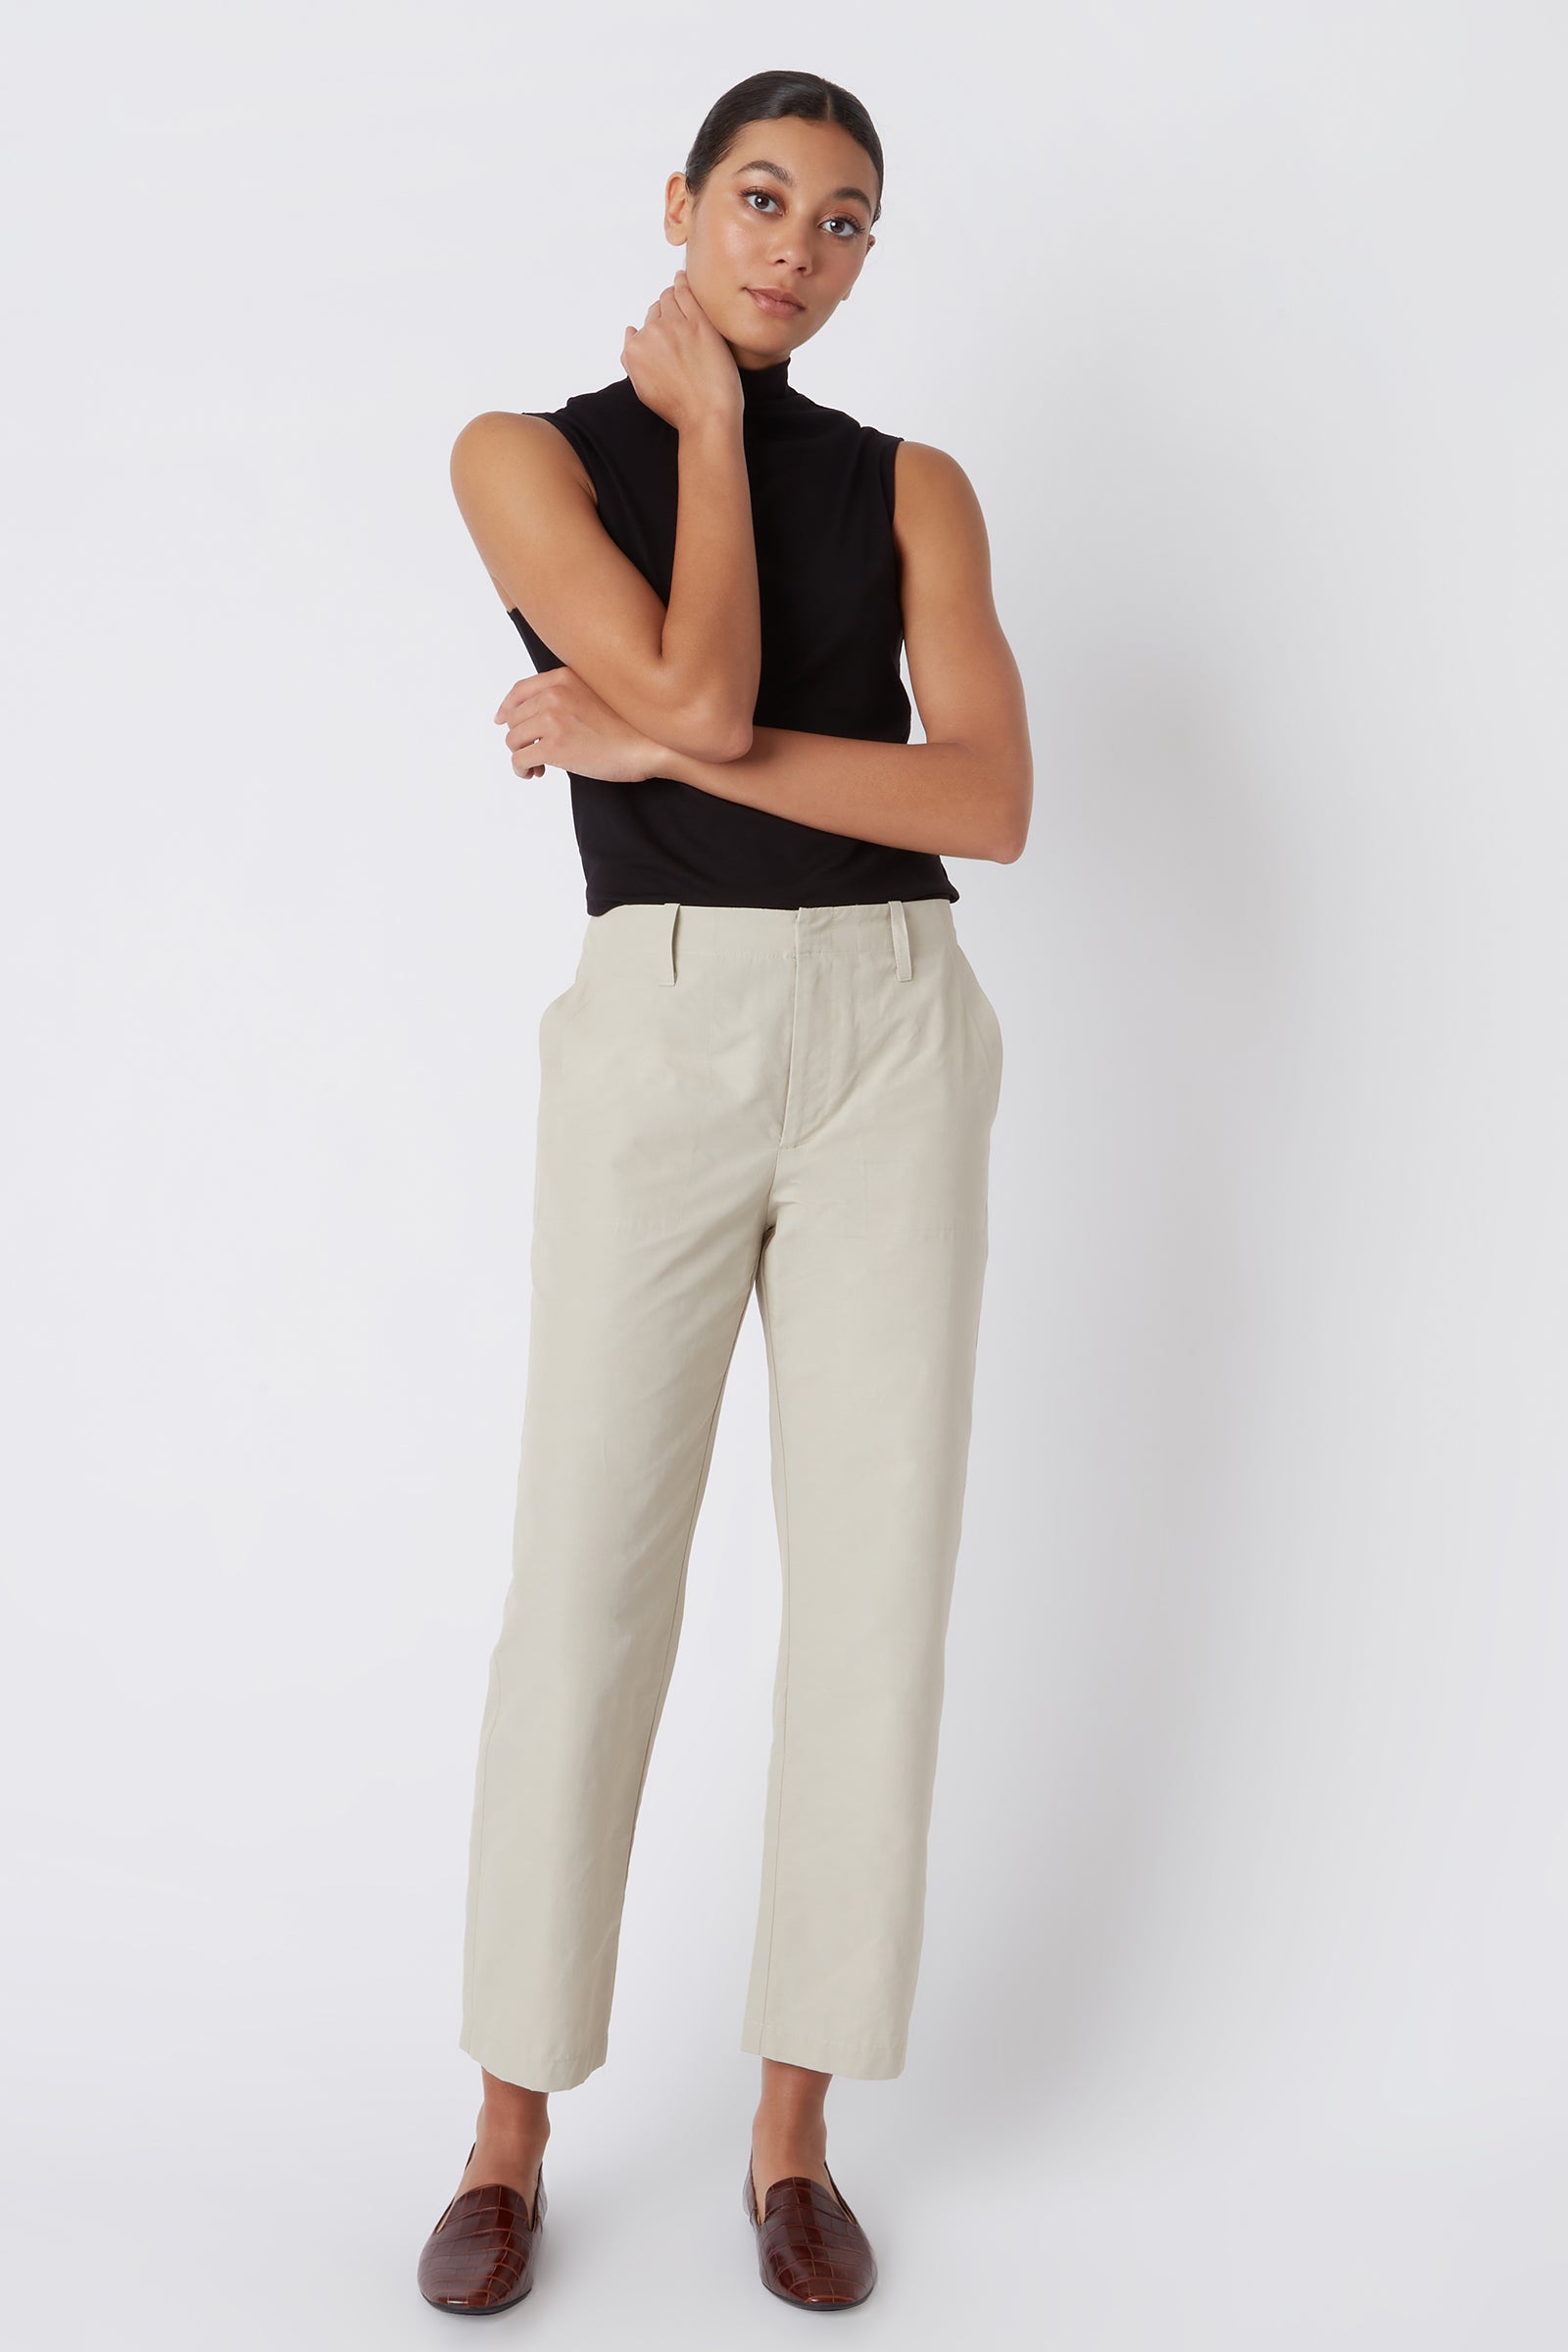 Kal Rieman Francoise Cigarette Pant in Classic Khaki Italian Broadcloth on Model with Arm on Neck Full Front View